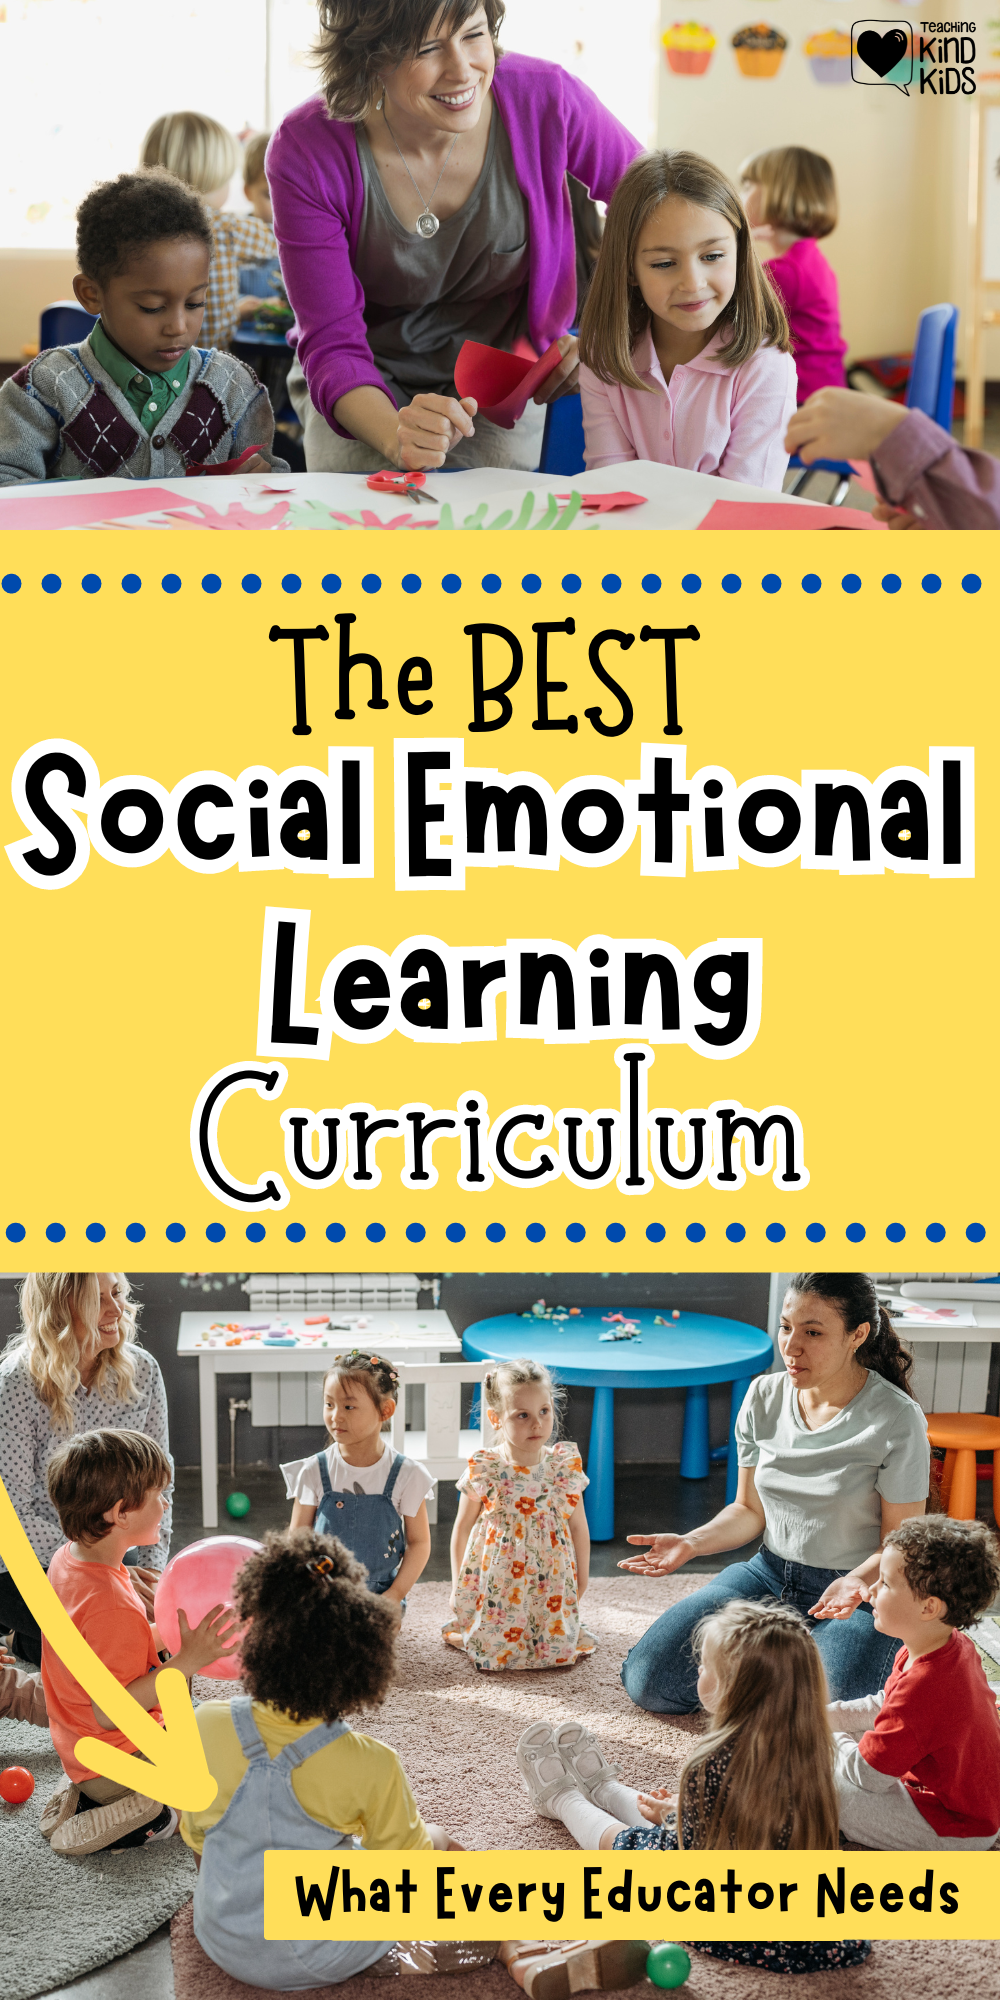 Use this social emotional learning curriculum to teach sel and kindness concepts to elementary school students.